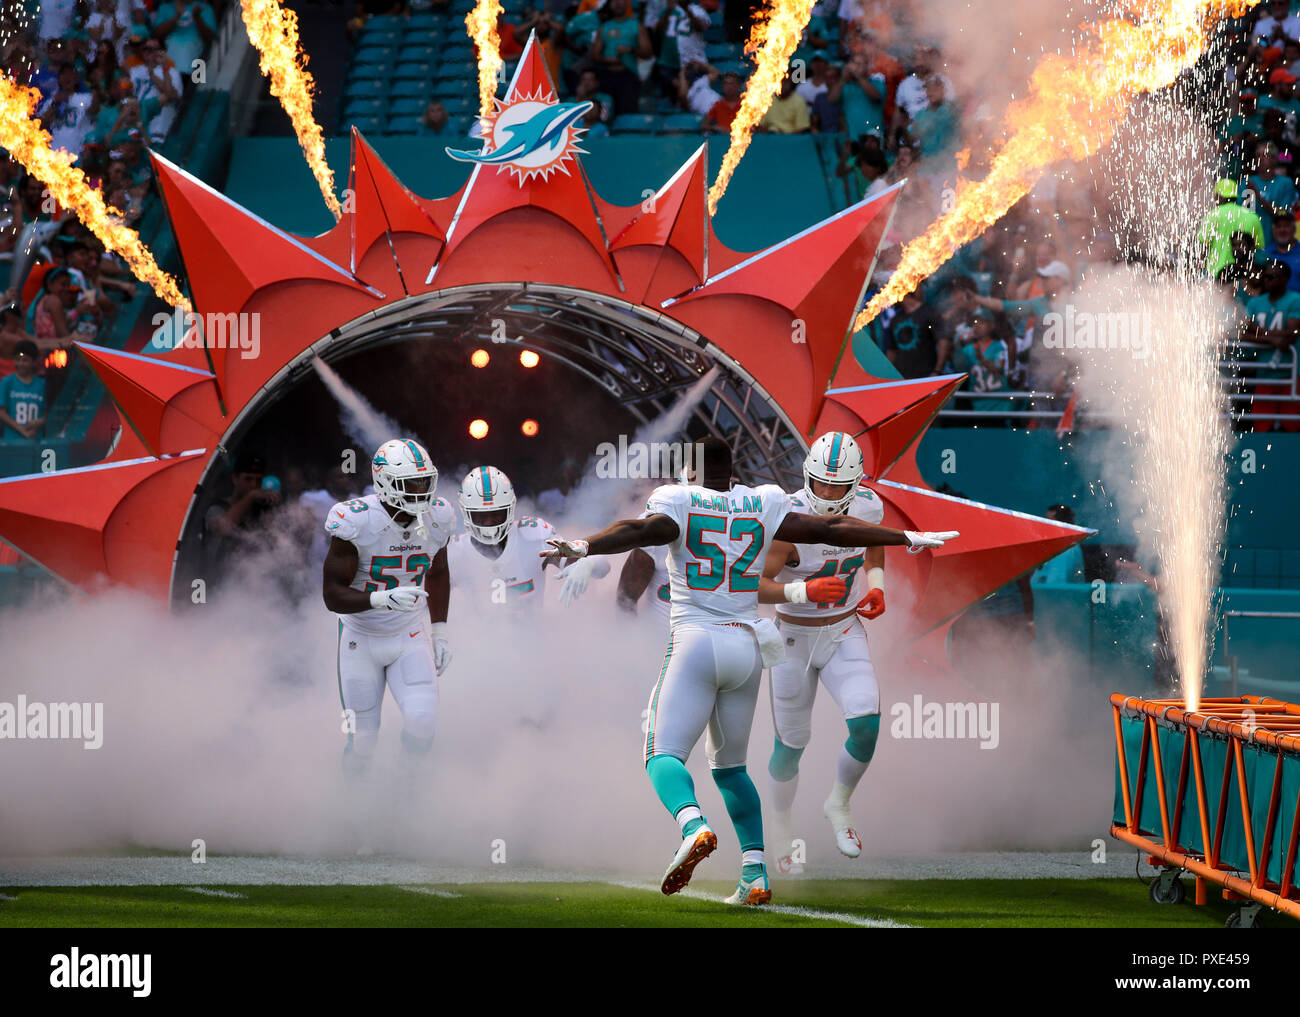 miami dolphins opening game